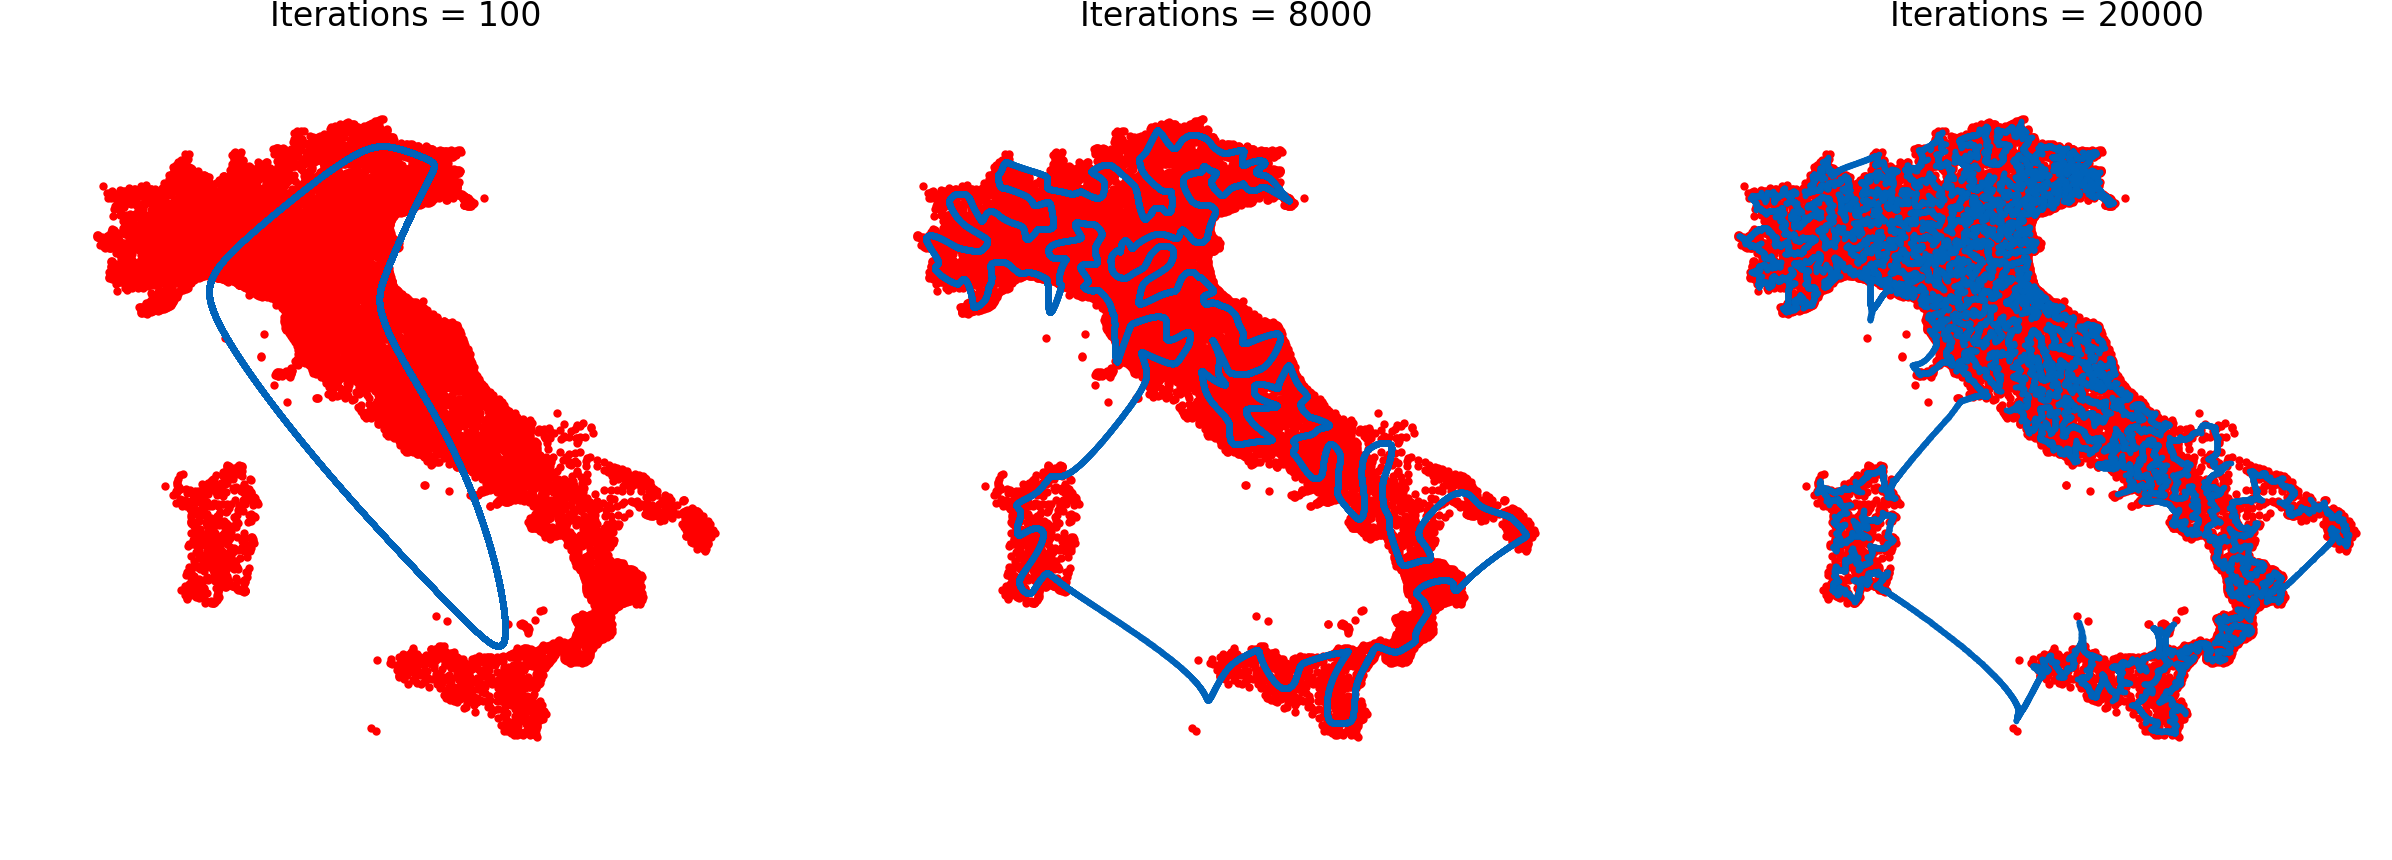 Self-organizing maps approximating the traveling salesman problem for Italy